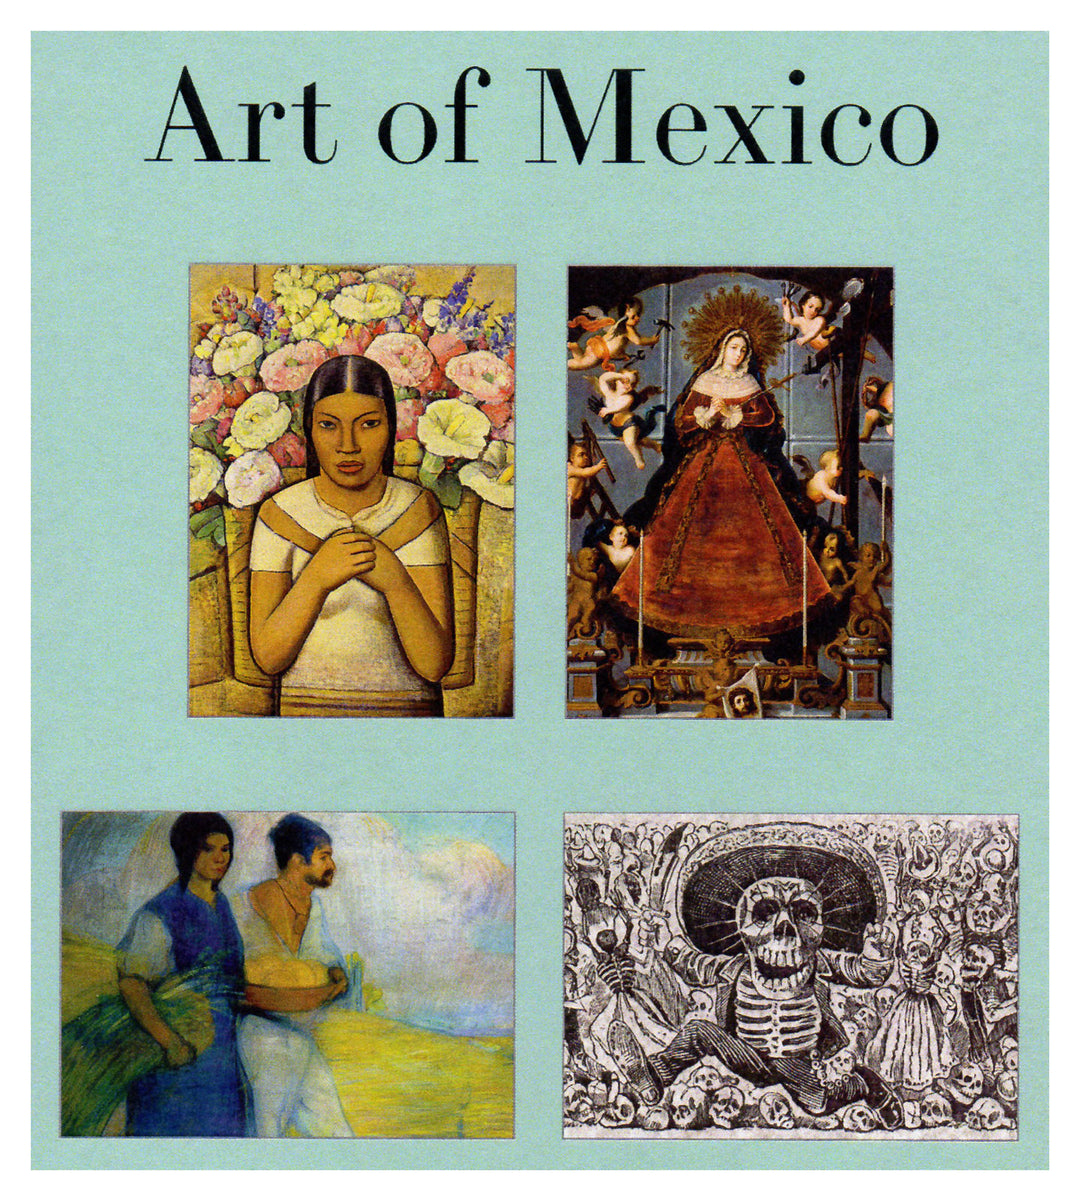 Art of Mexico Note Cards - Boxed Set of 16 Note Cards with Envelopes